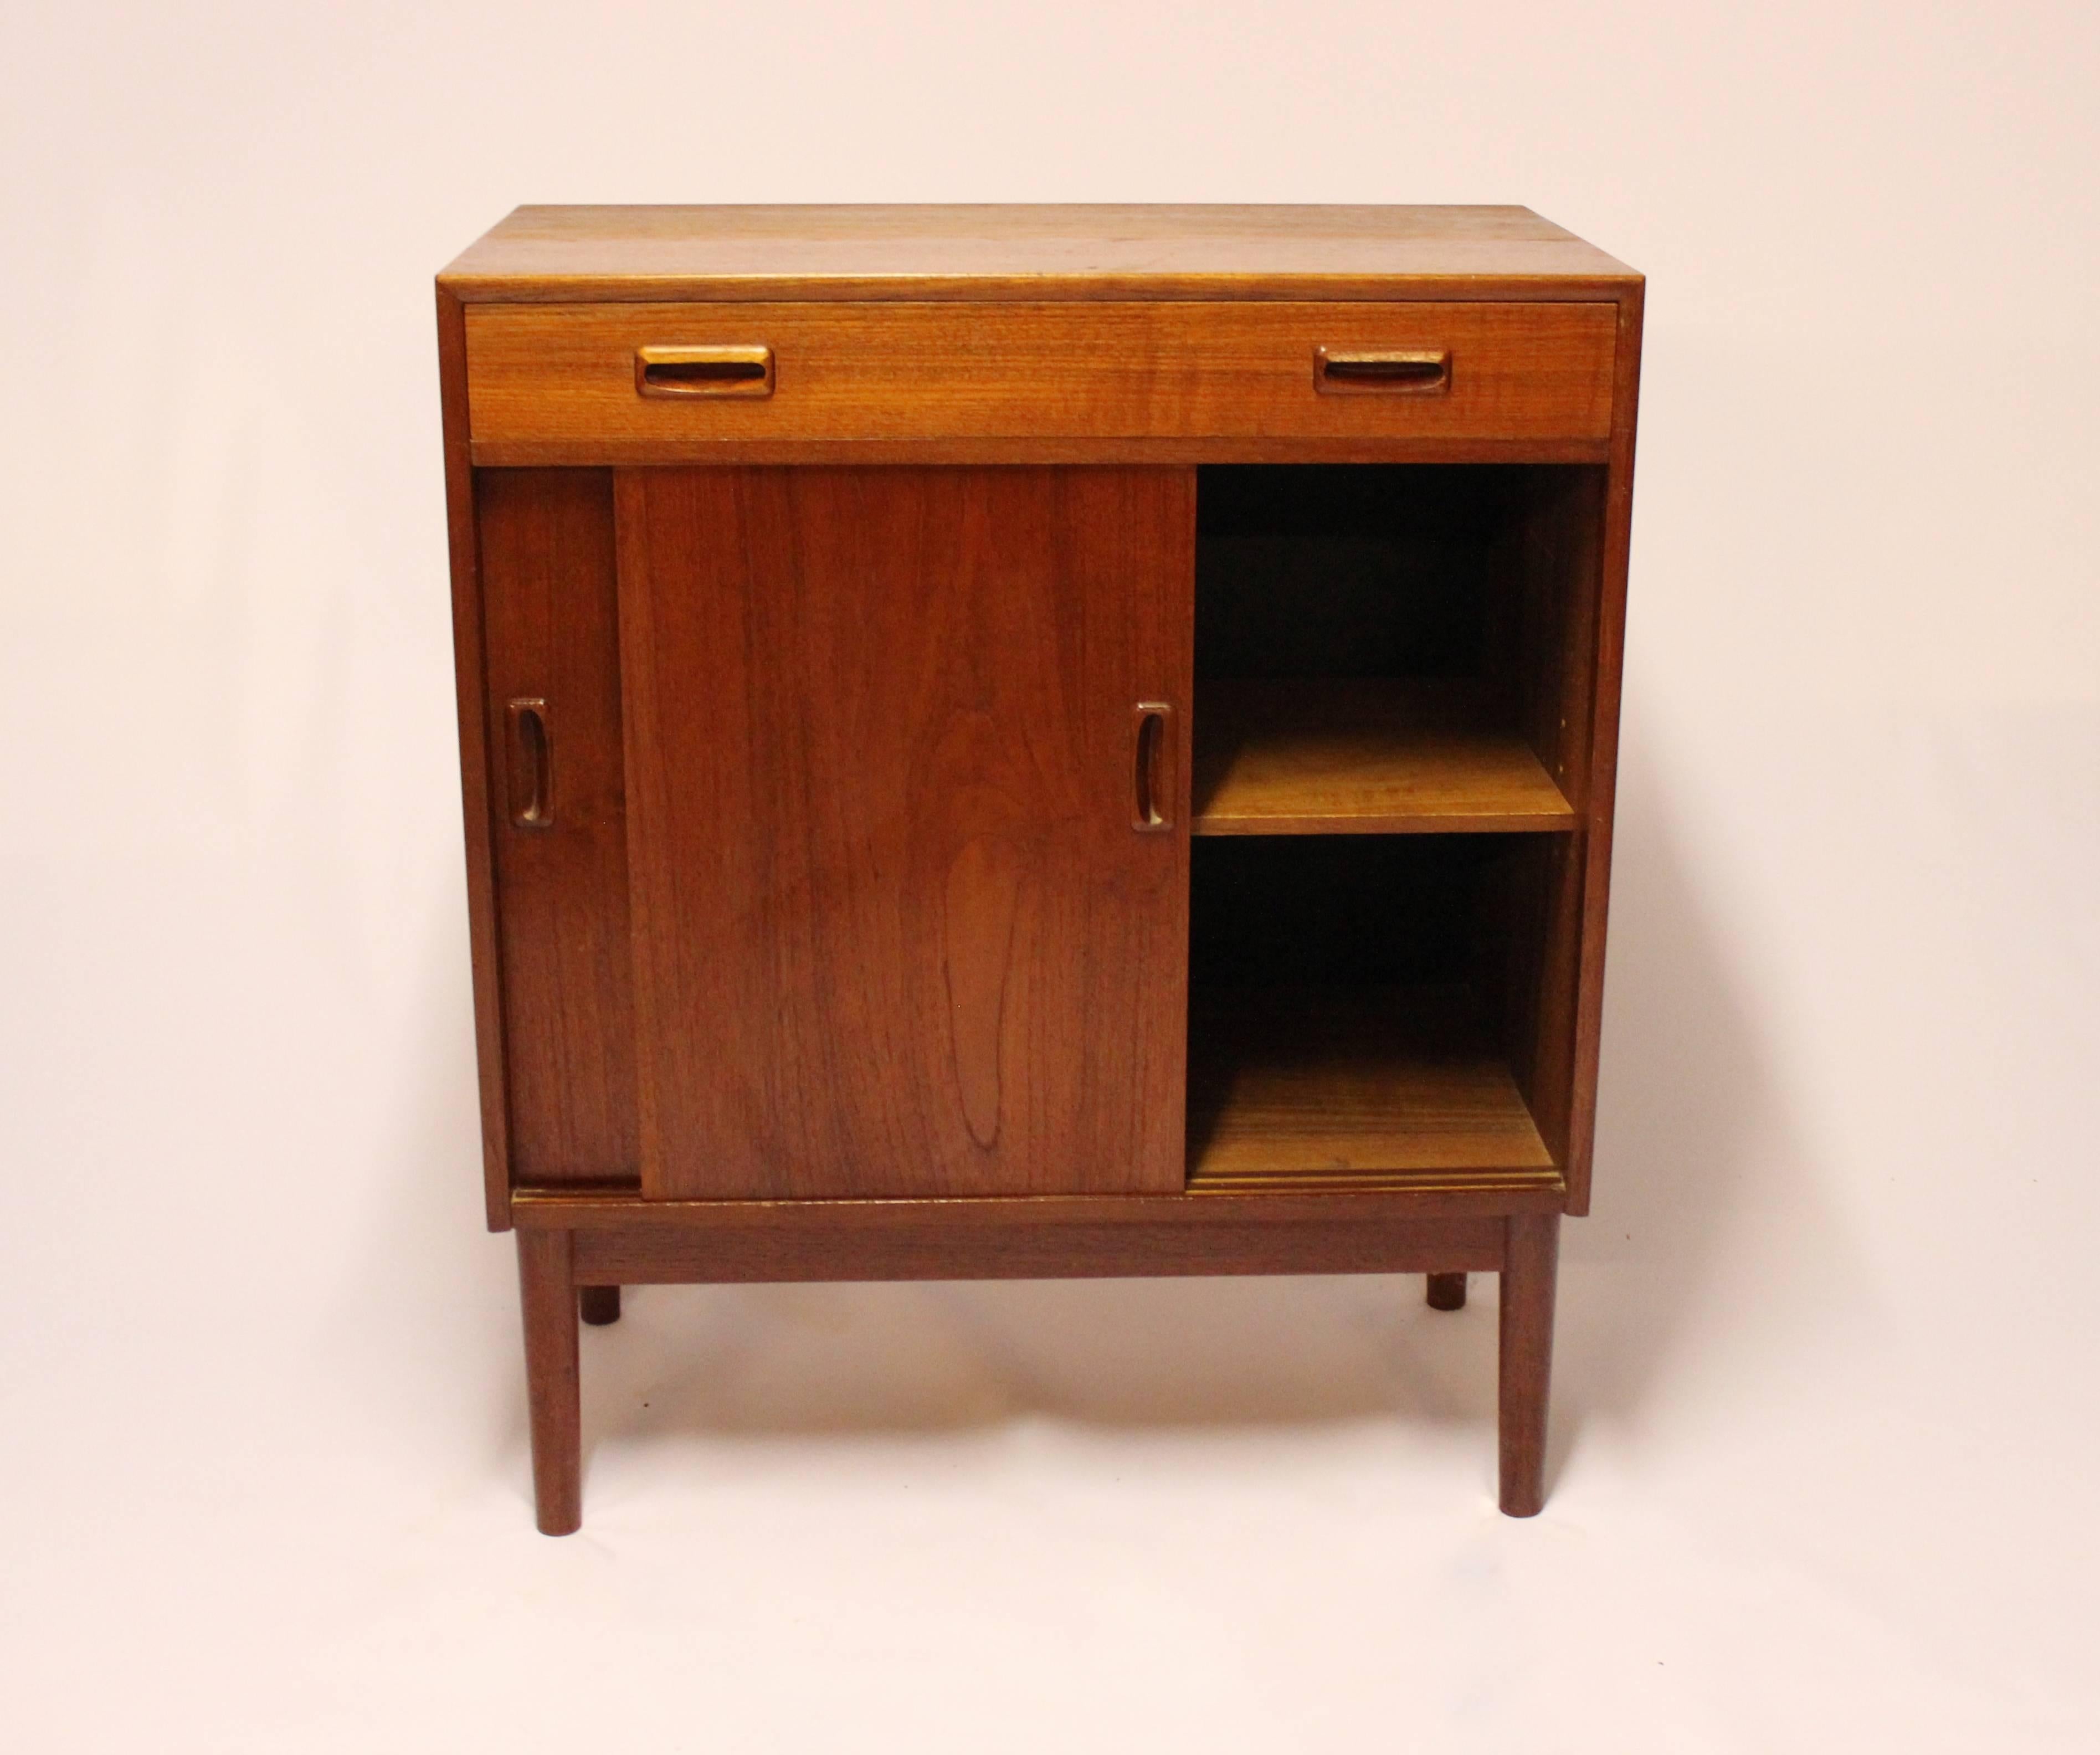 Sideboard with sliding doors in teak of Danish design from the 1960s. The sideboard is in great vintage condition and we have one more in stock.